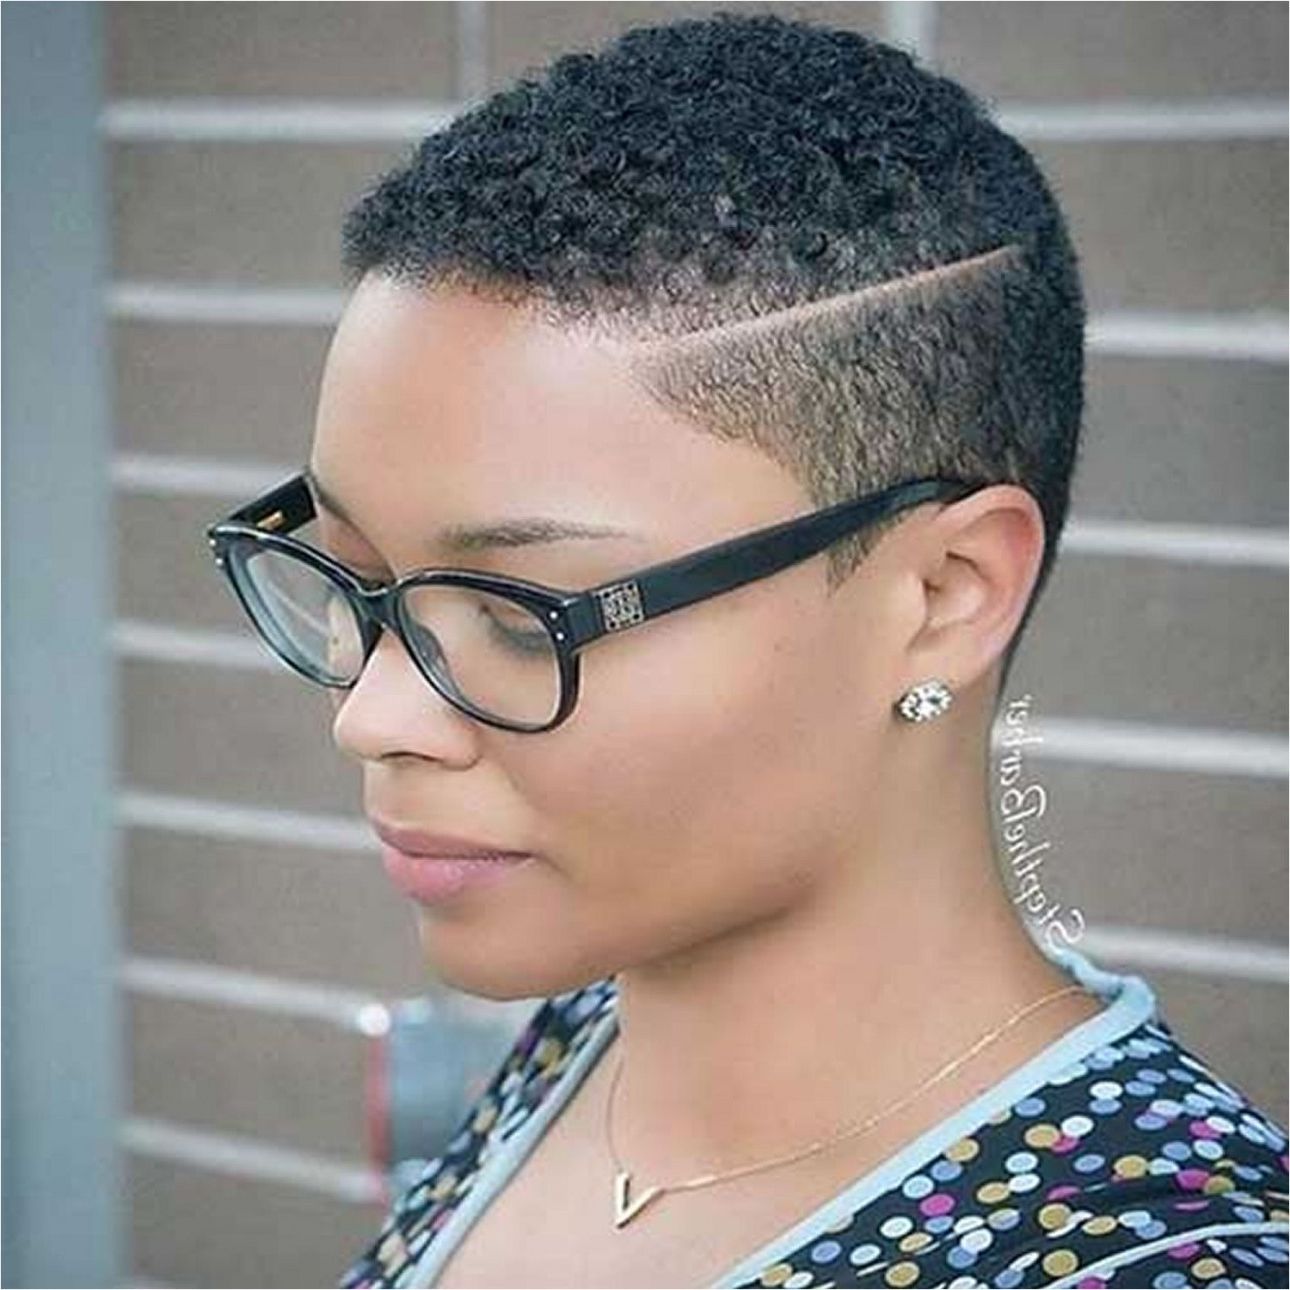 Black Short Hairstyles 2018 | Pretty Black Woman Haircut Hairstyles With Regard To Natural Short Haircuts For Black Women (View 20 of 25)